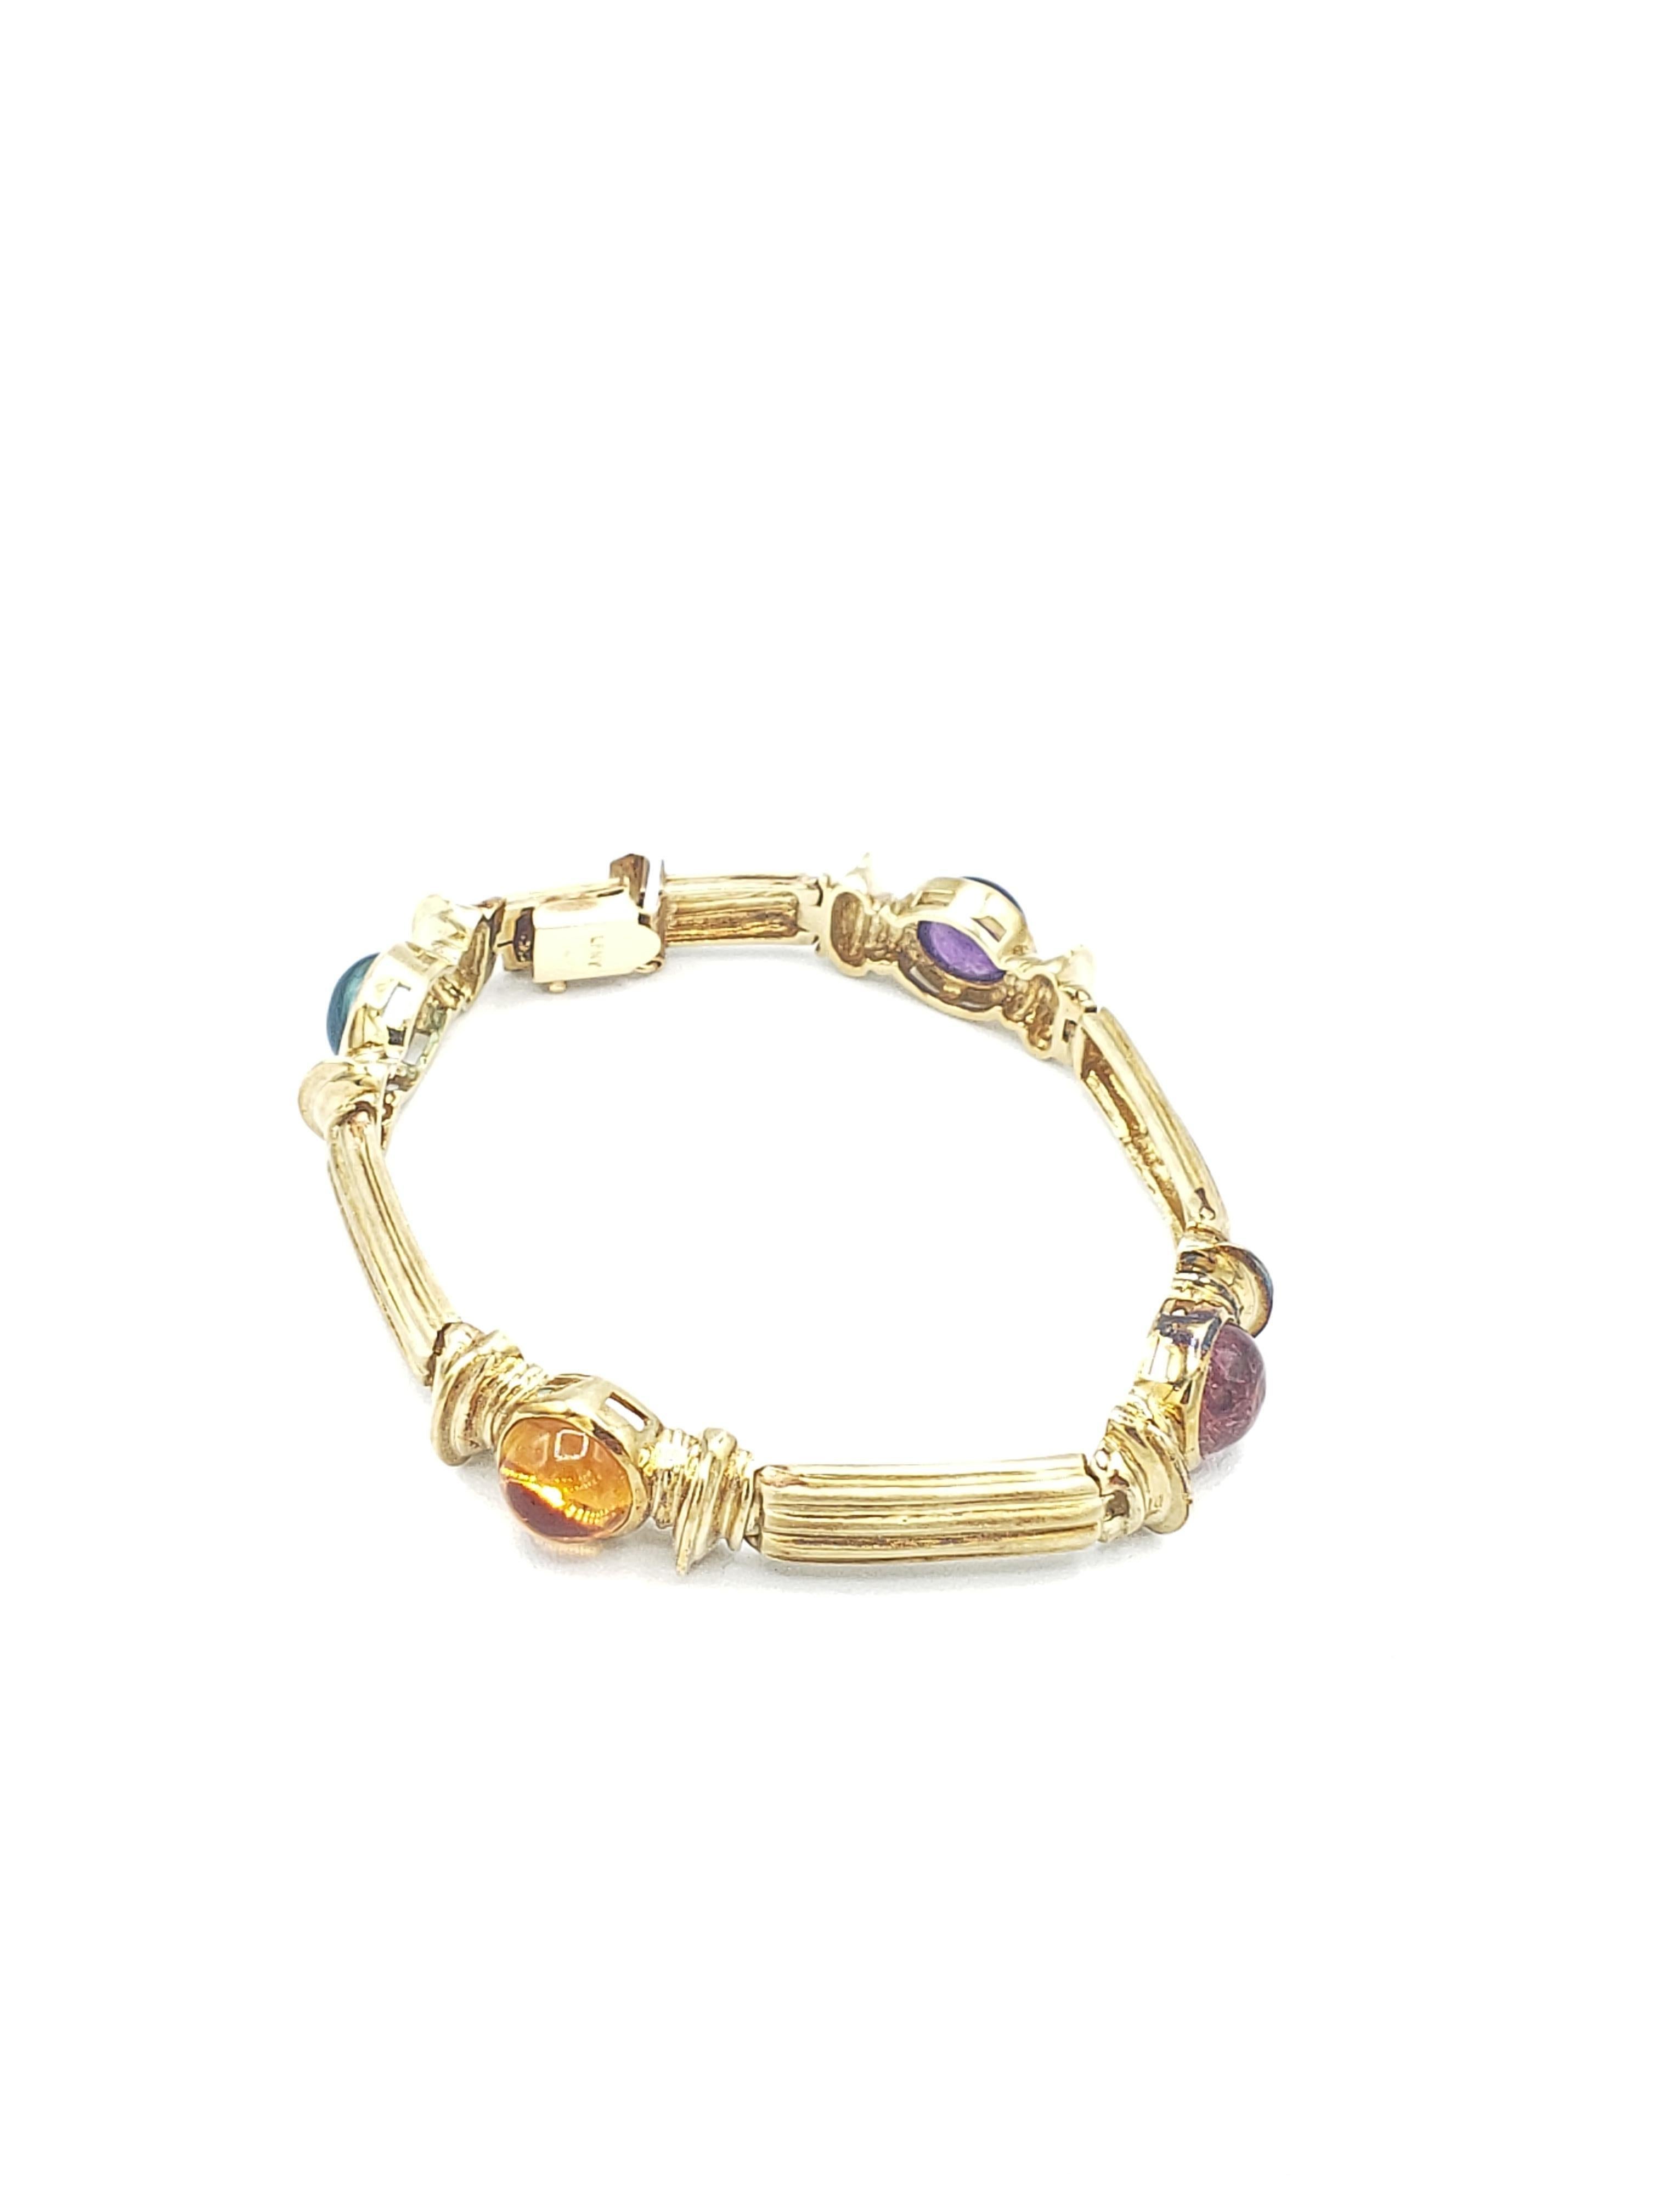 This beautiful bracelet is a stunning addition to any jewelry collection. Expertly crafted from 14k solid yellow gold, it features gorgeous blue and pink tourmaline, amethyst, and citrine gemstones. The nature-inspired wrap style gives it a unique